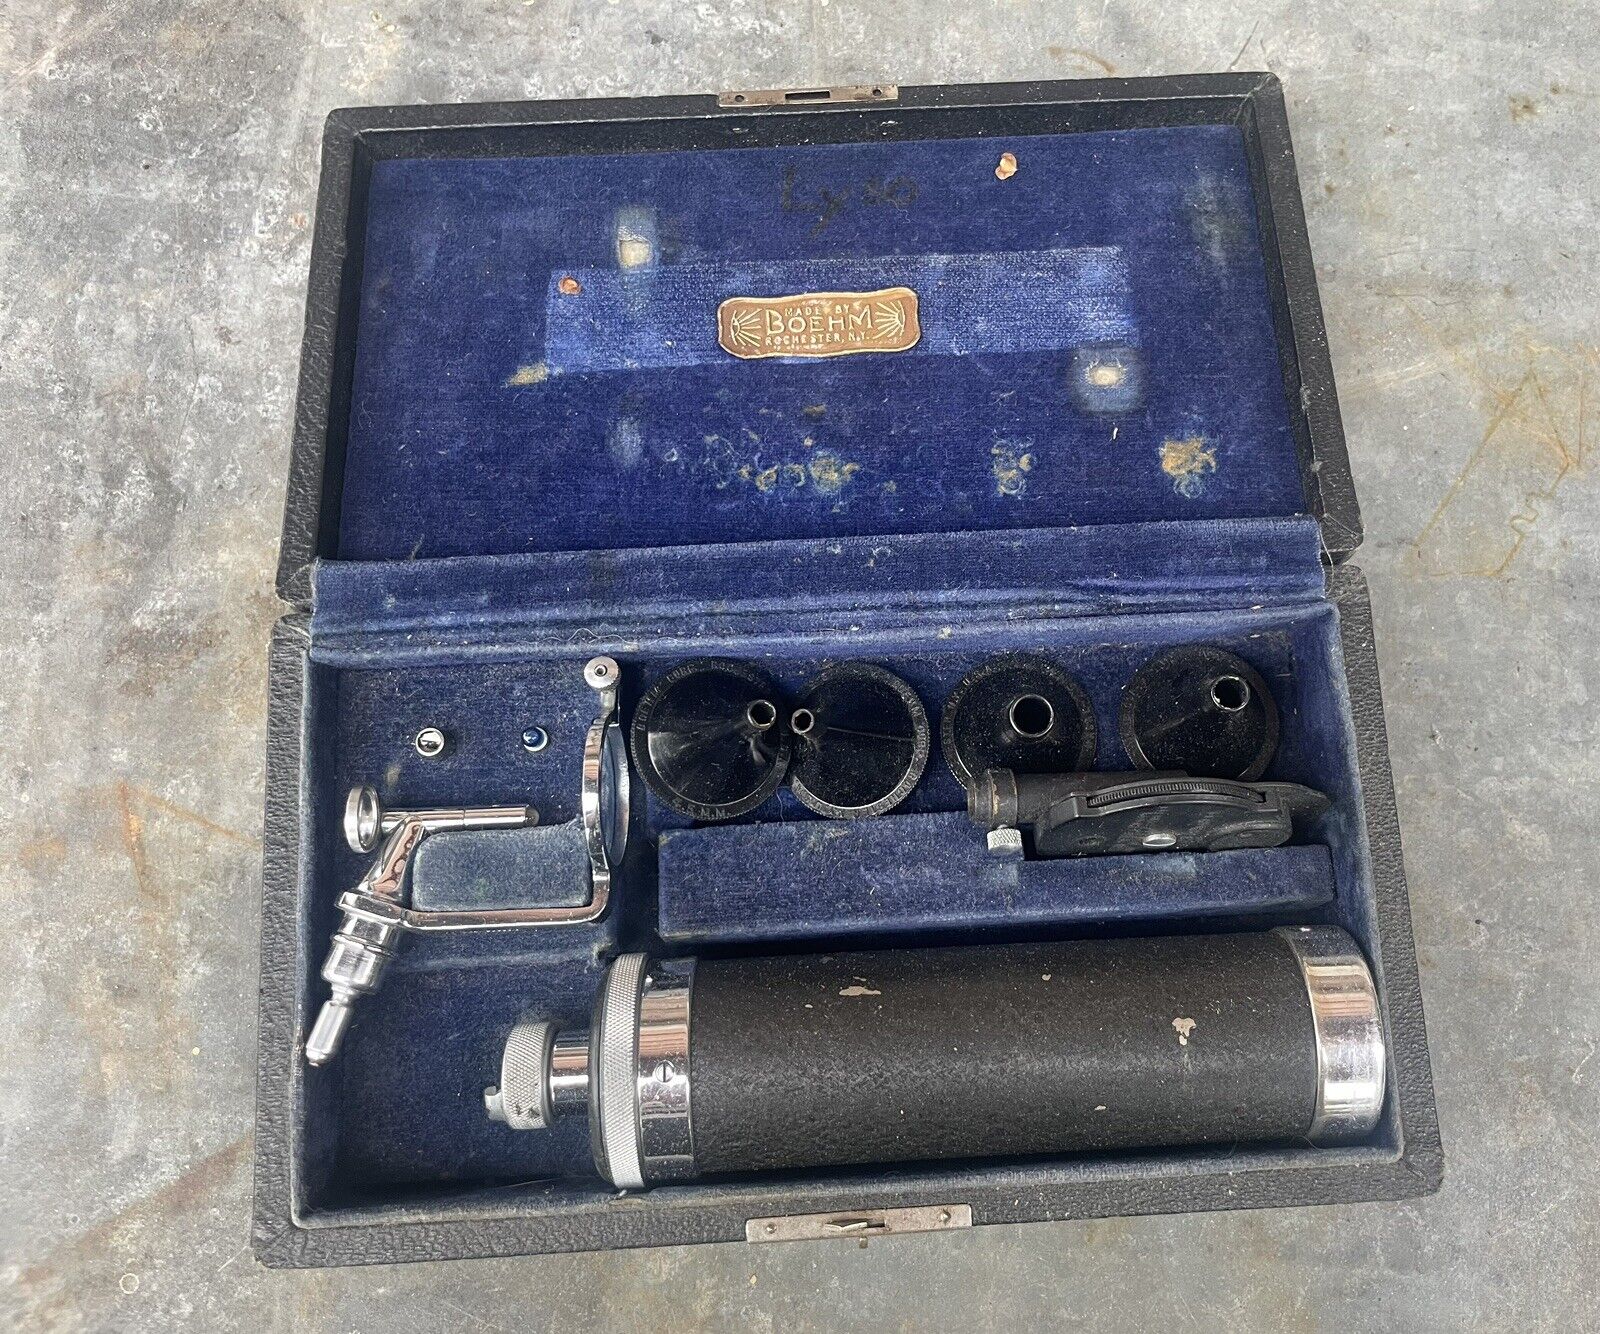 Antique Boehm Otoscope | Ear Nose & Throat | Oddity Vintage Rochester NY Medical